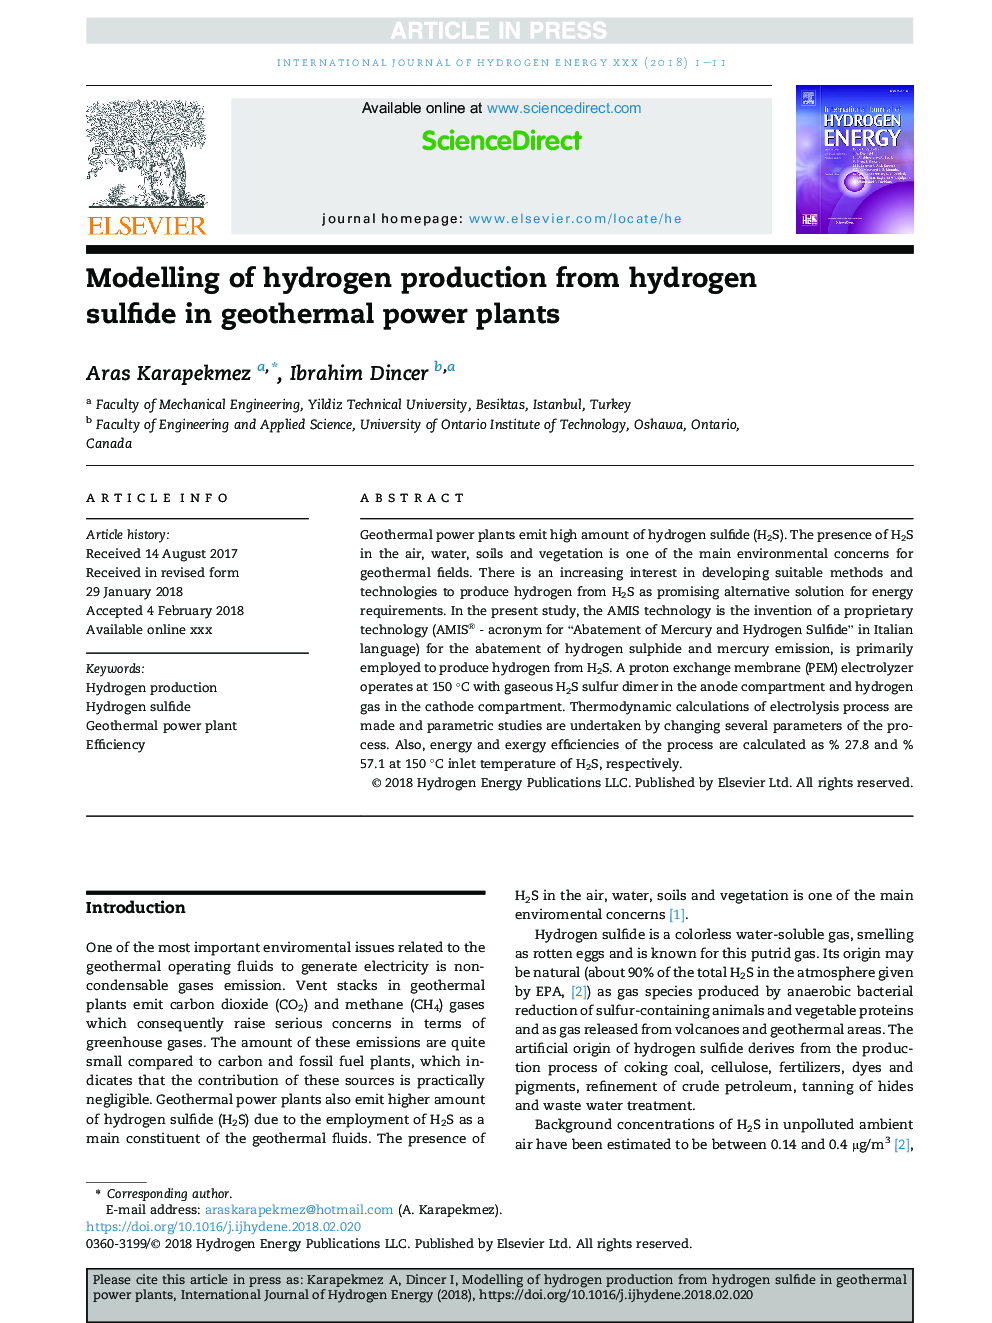 Modelling of hydrogen production from hydrogen sulfide in geothermal power plants